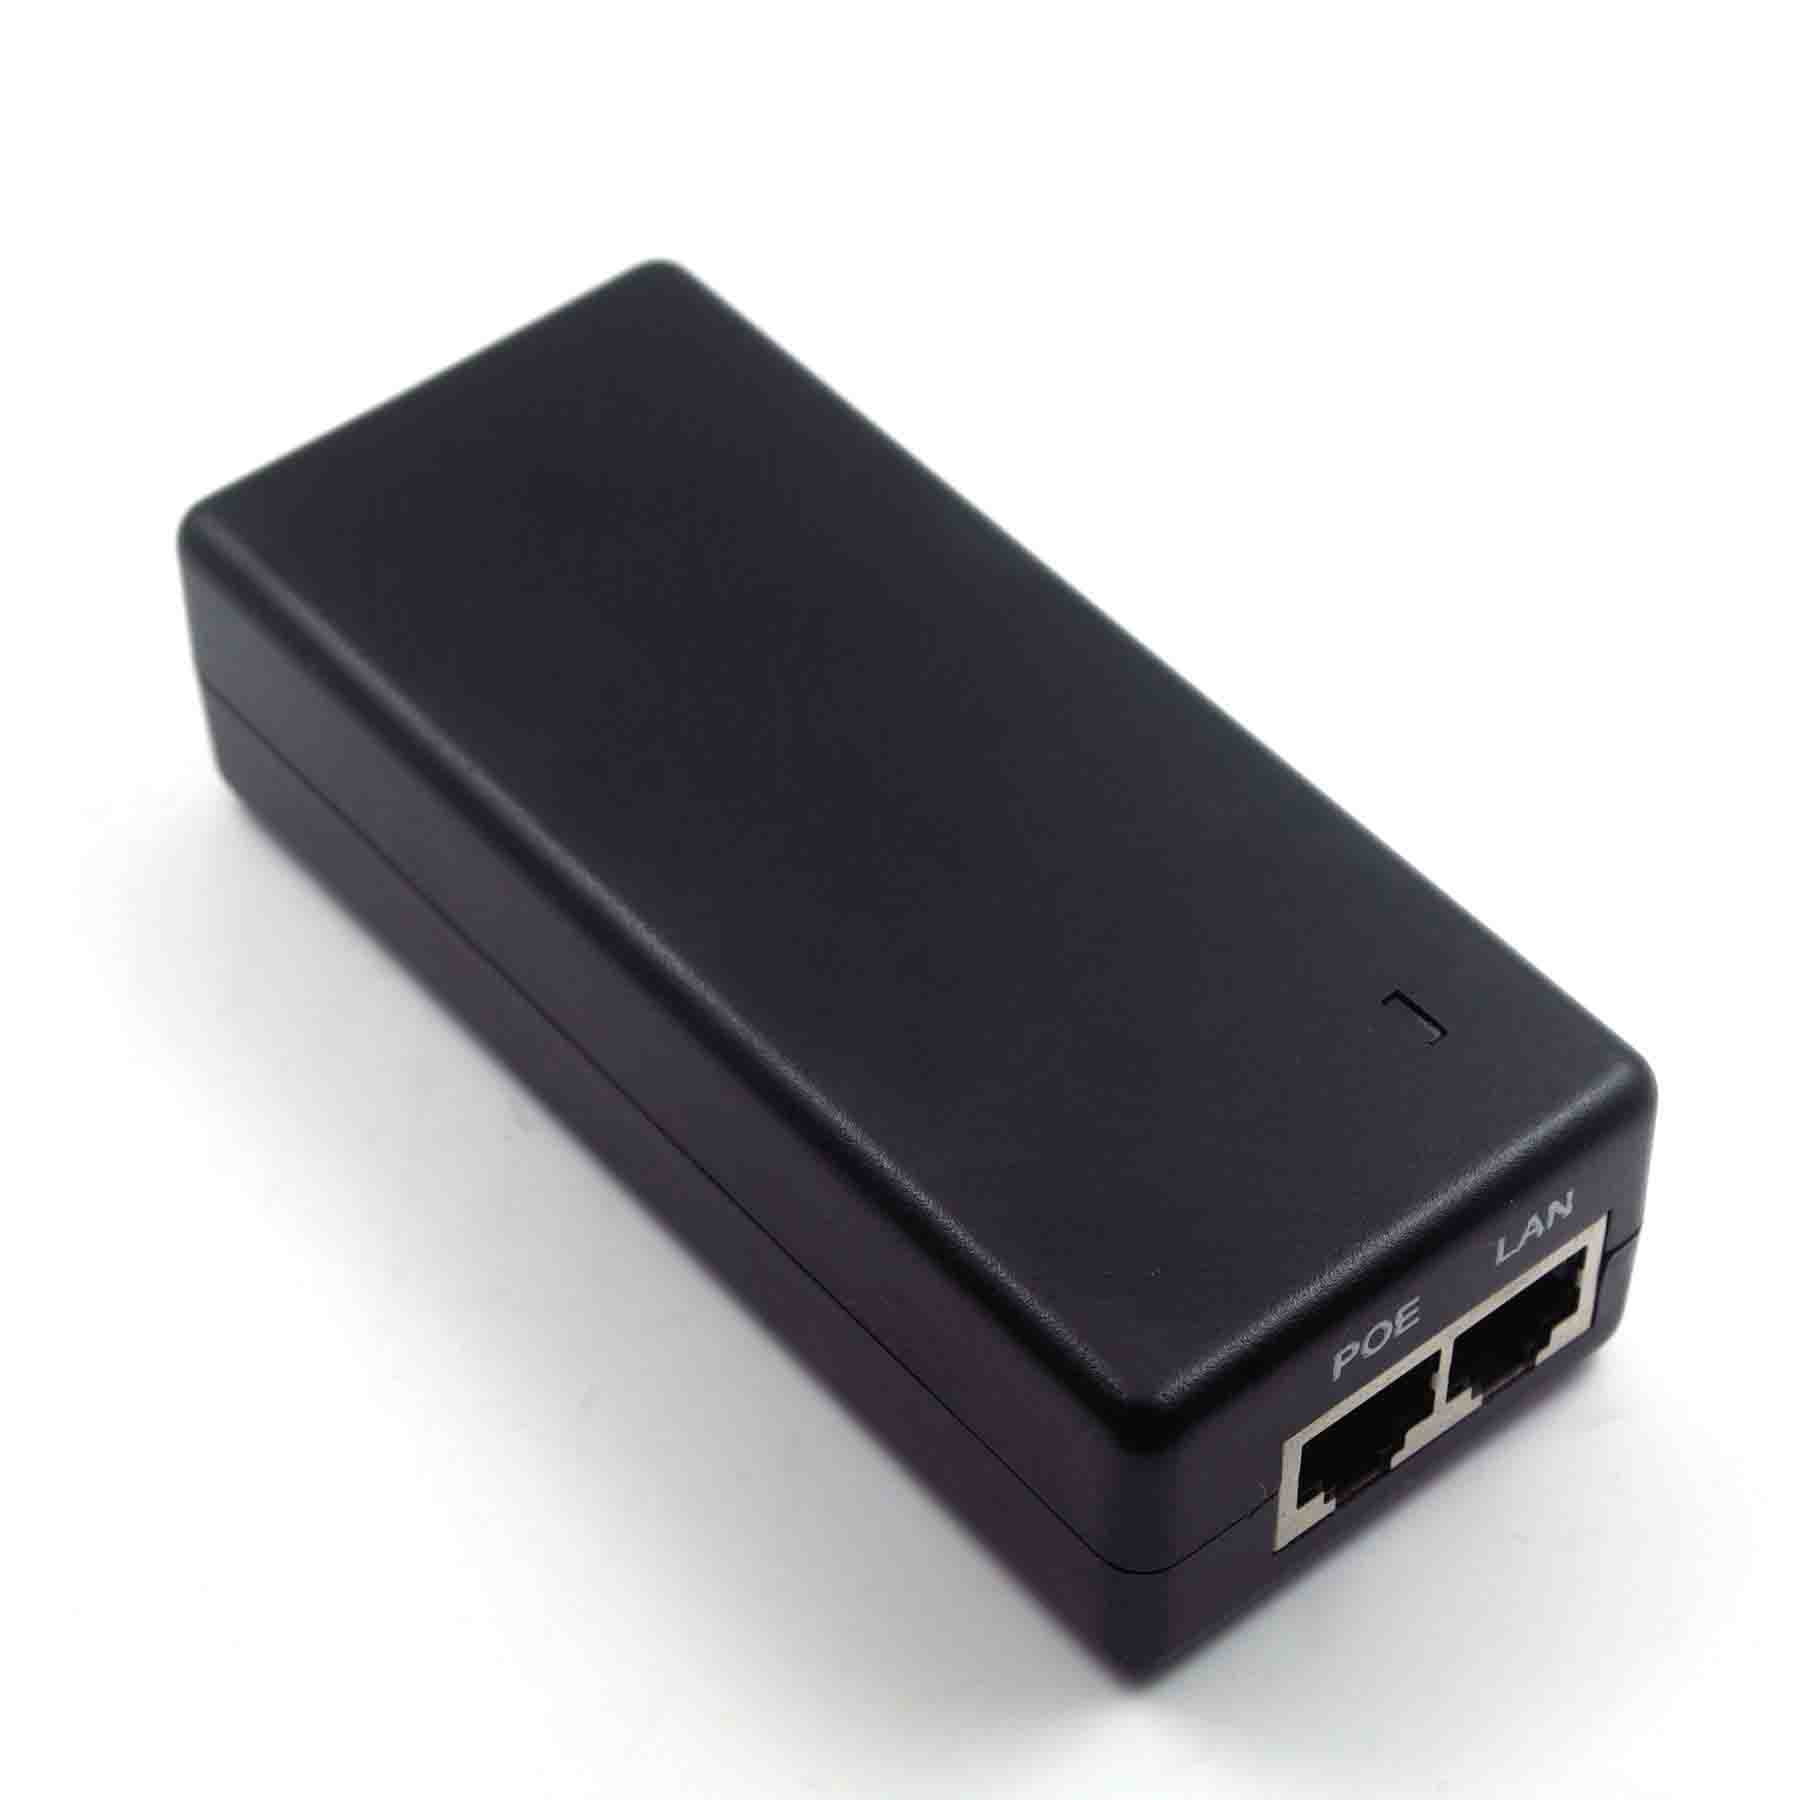 POE injector, Power Over Ethernet adapter